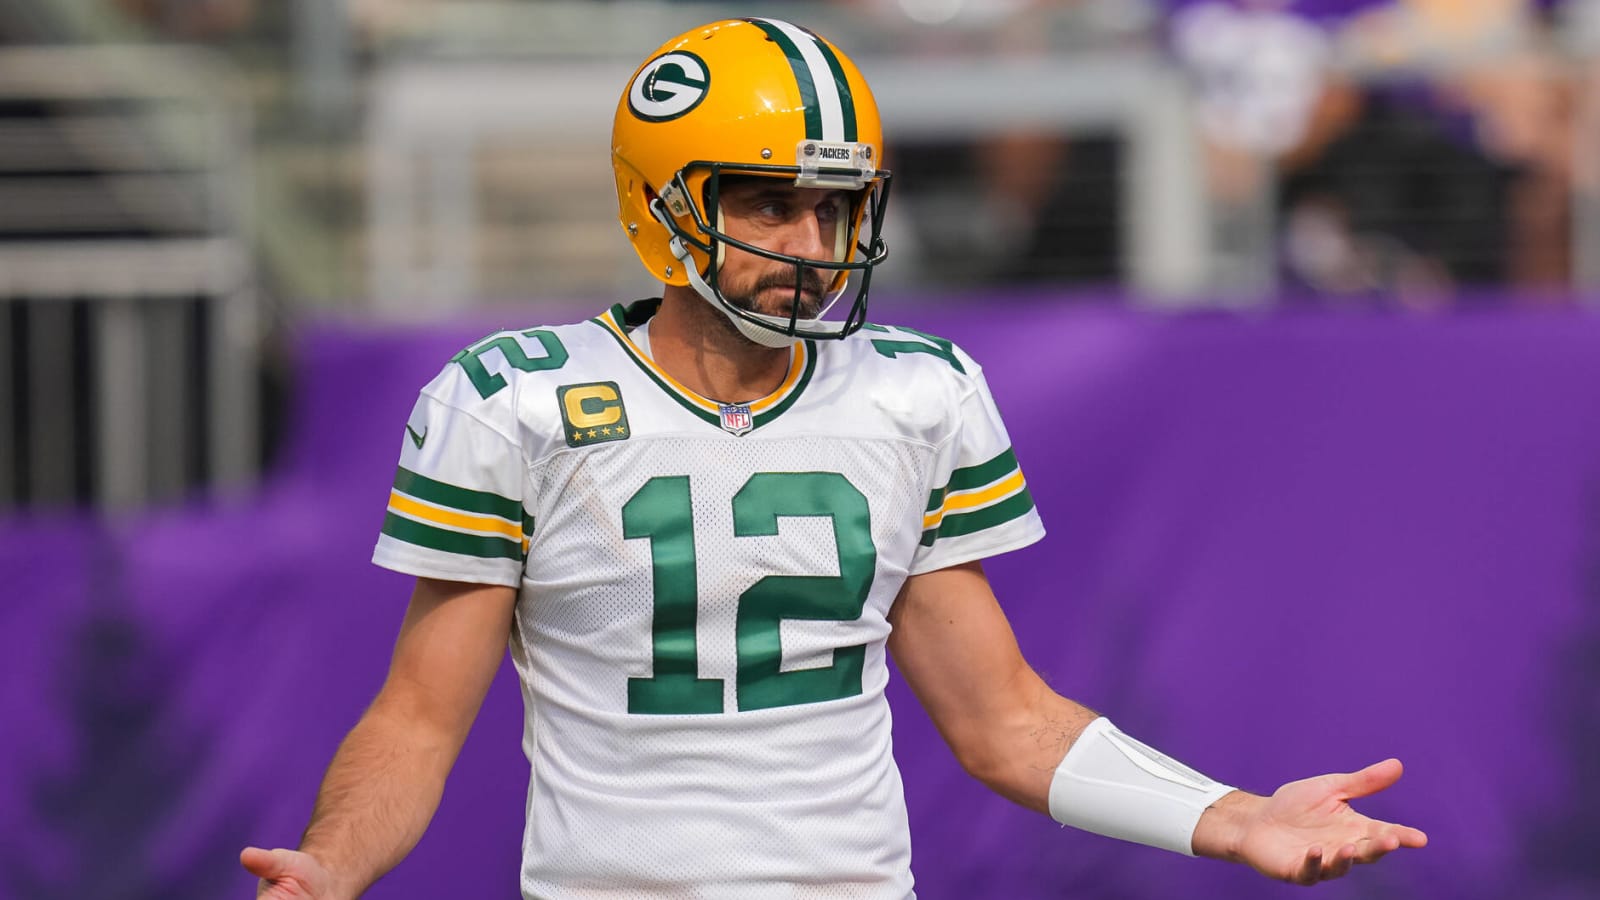 Aaron Rodgers: Chances to win Super Bowl 'are getting fewer'